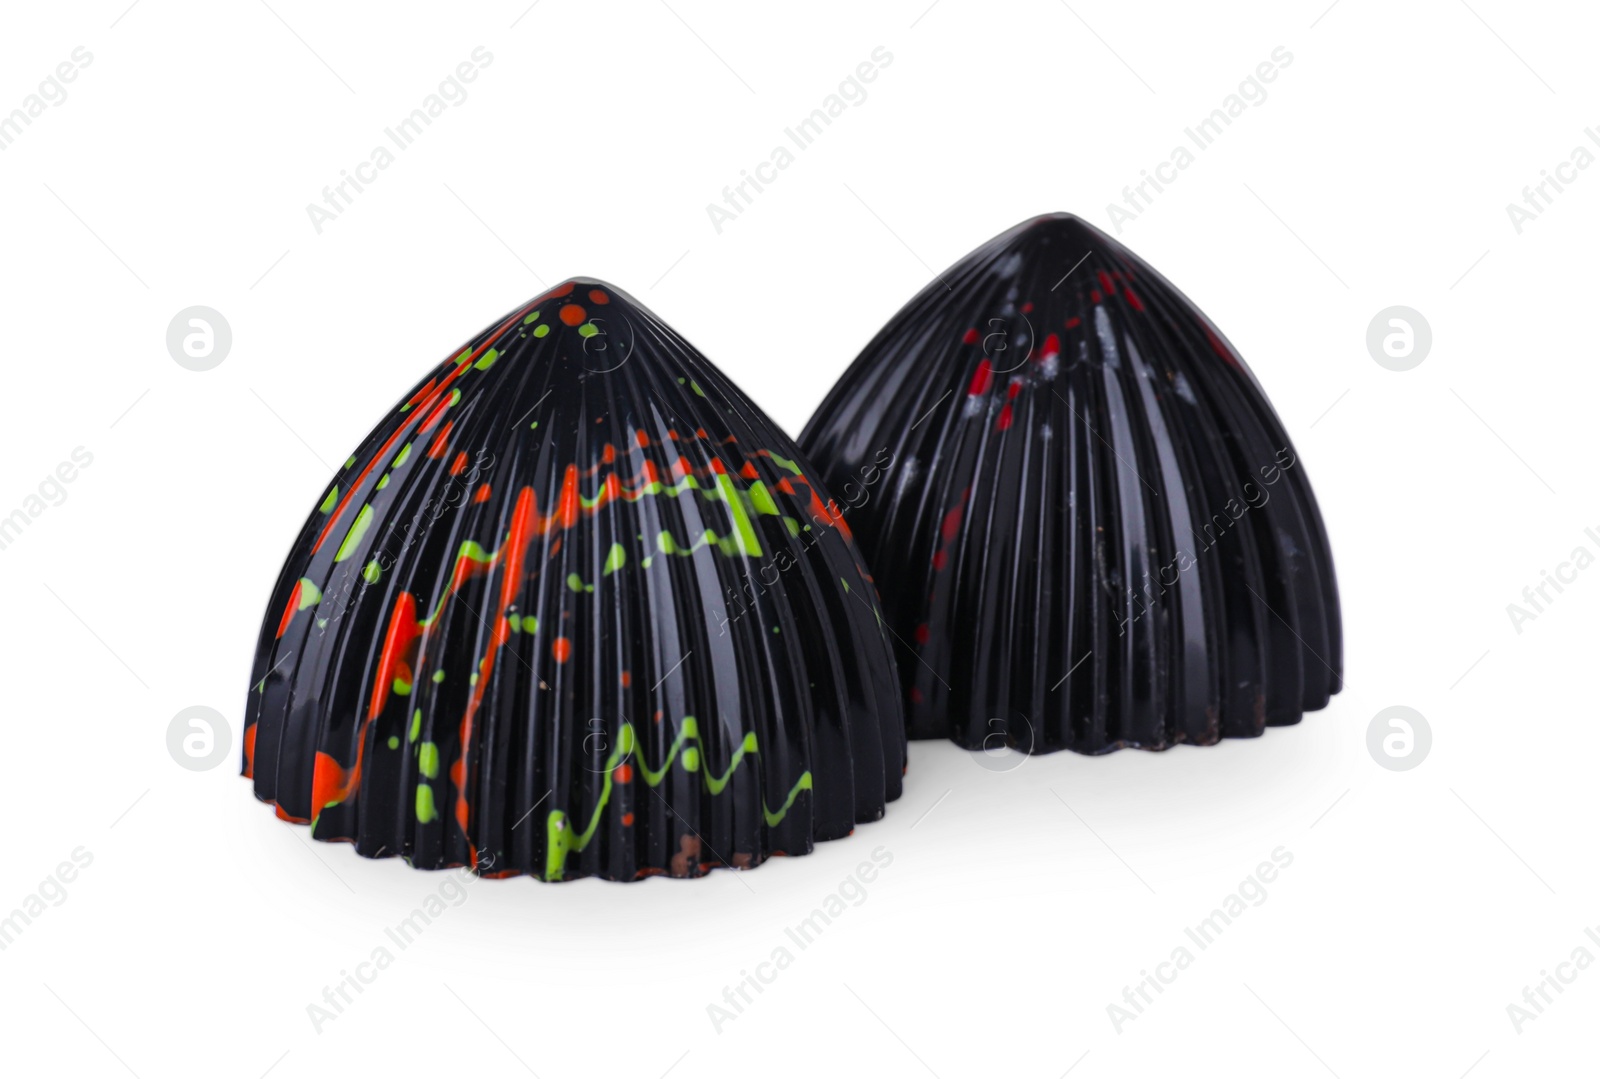 Photo of Two tasty chocolate candies on white background